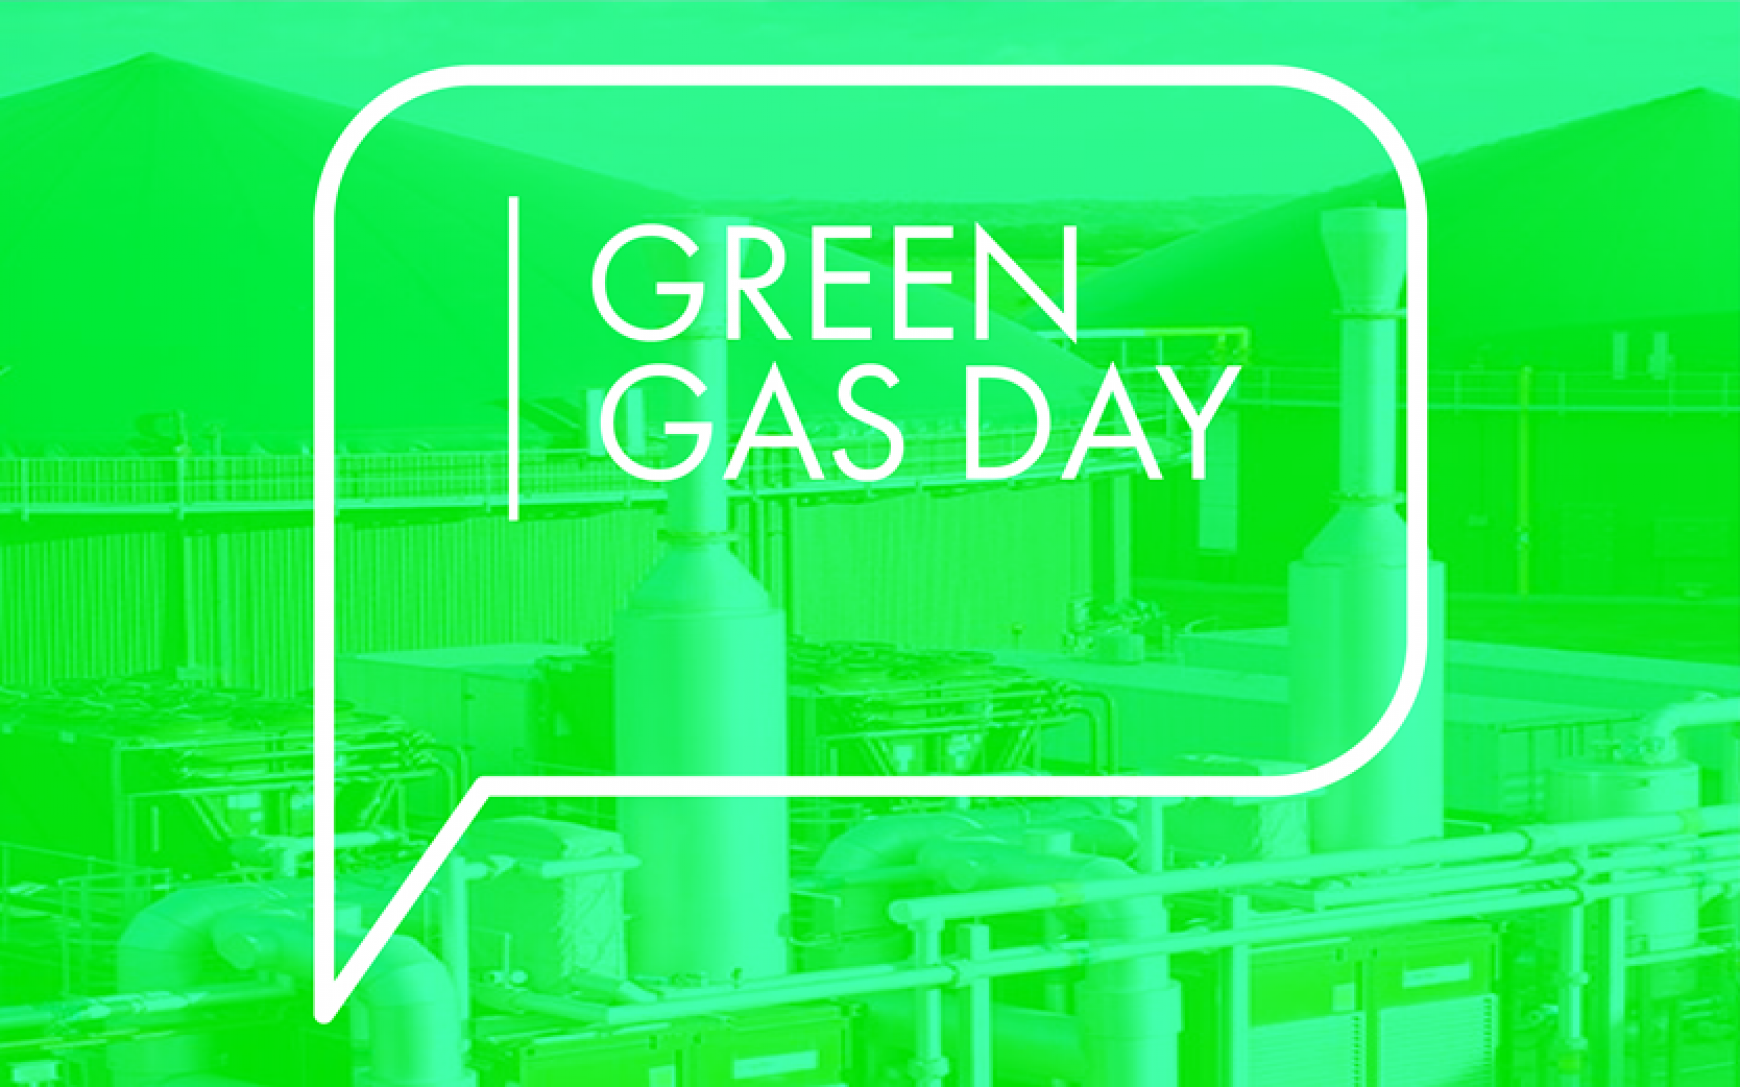  annual Green Gas Day event 2021